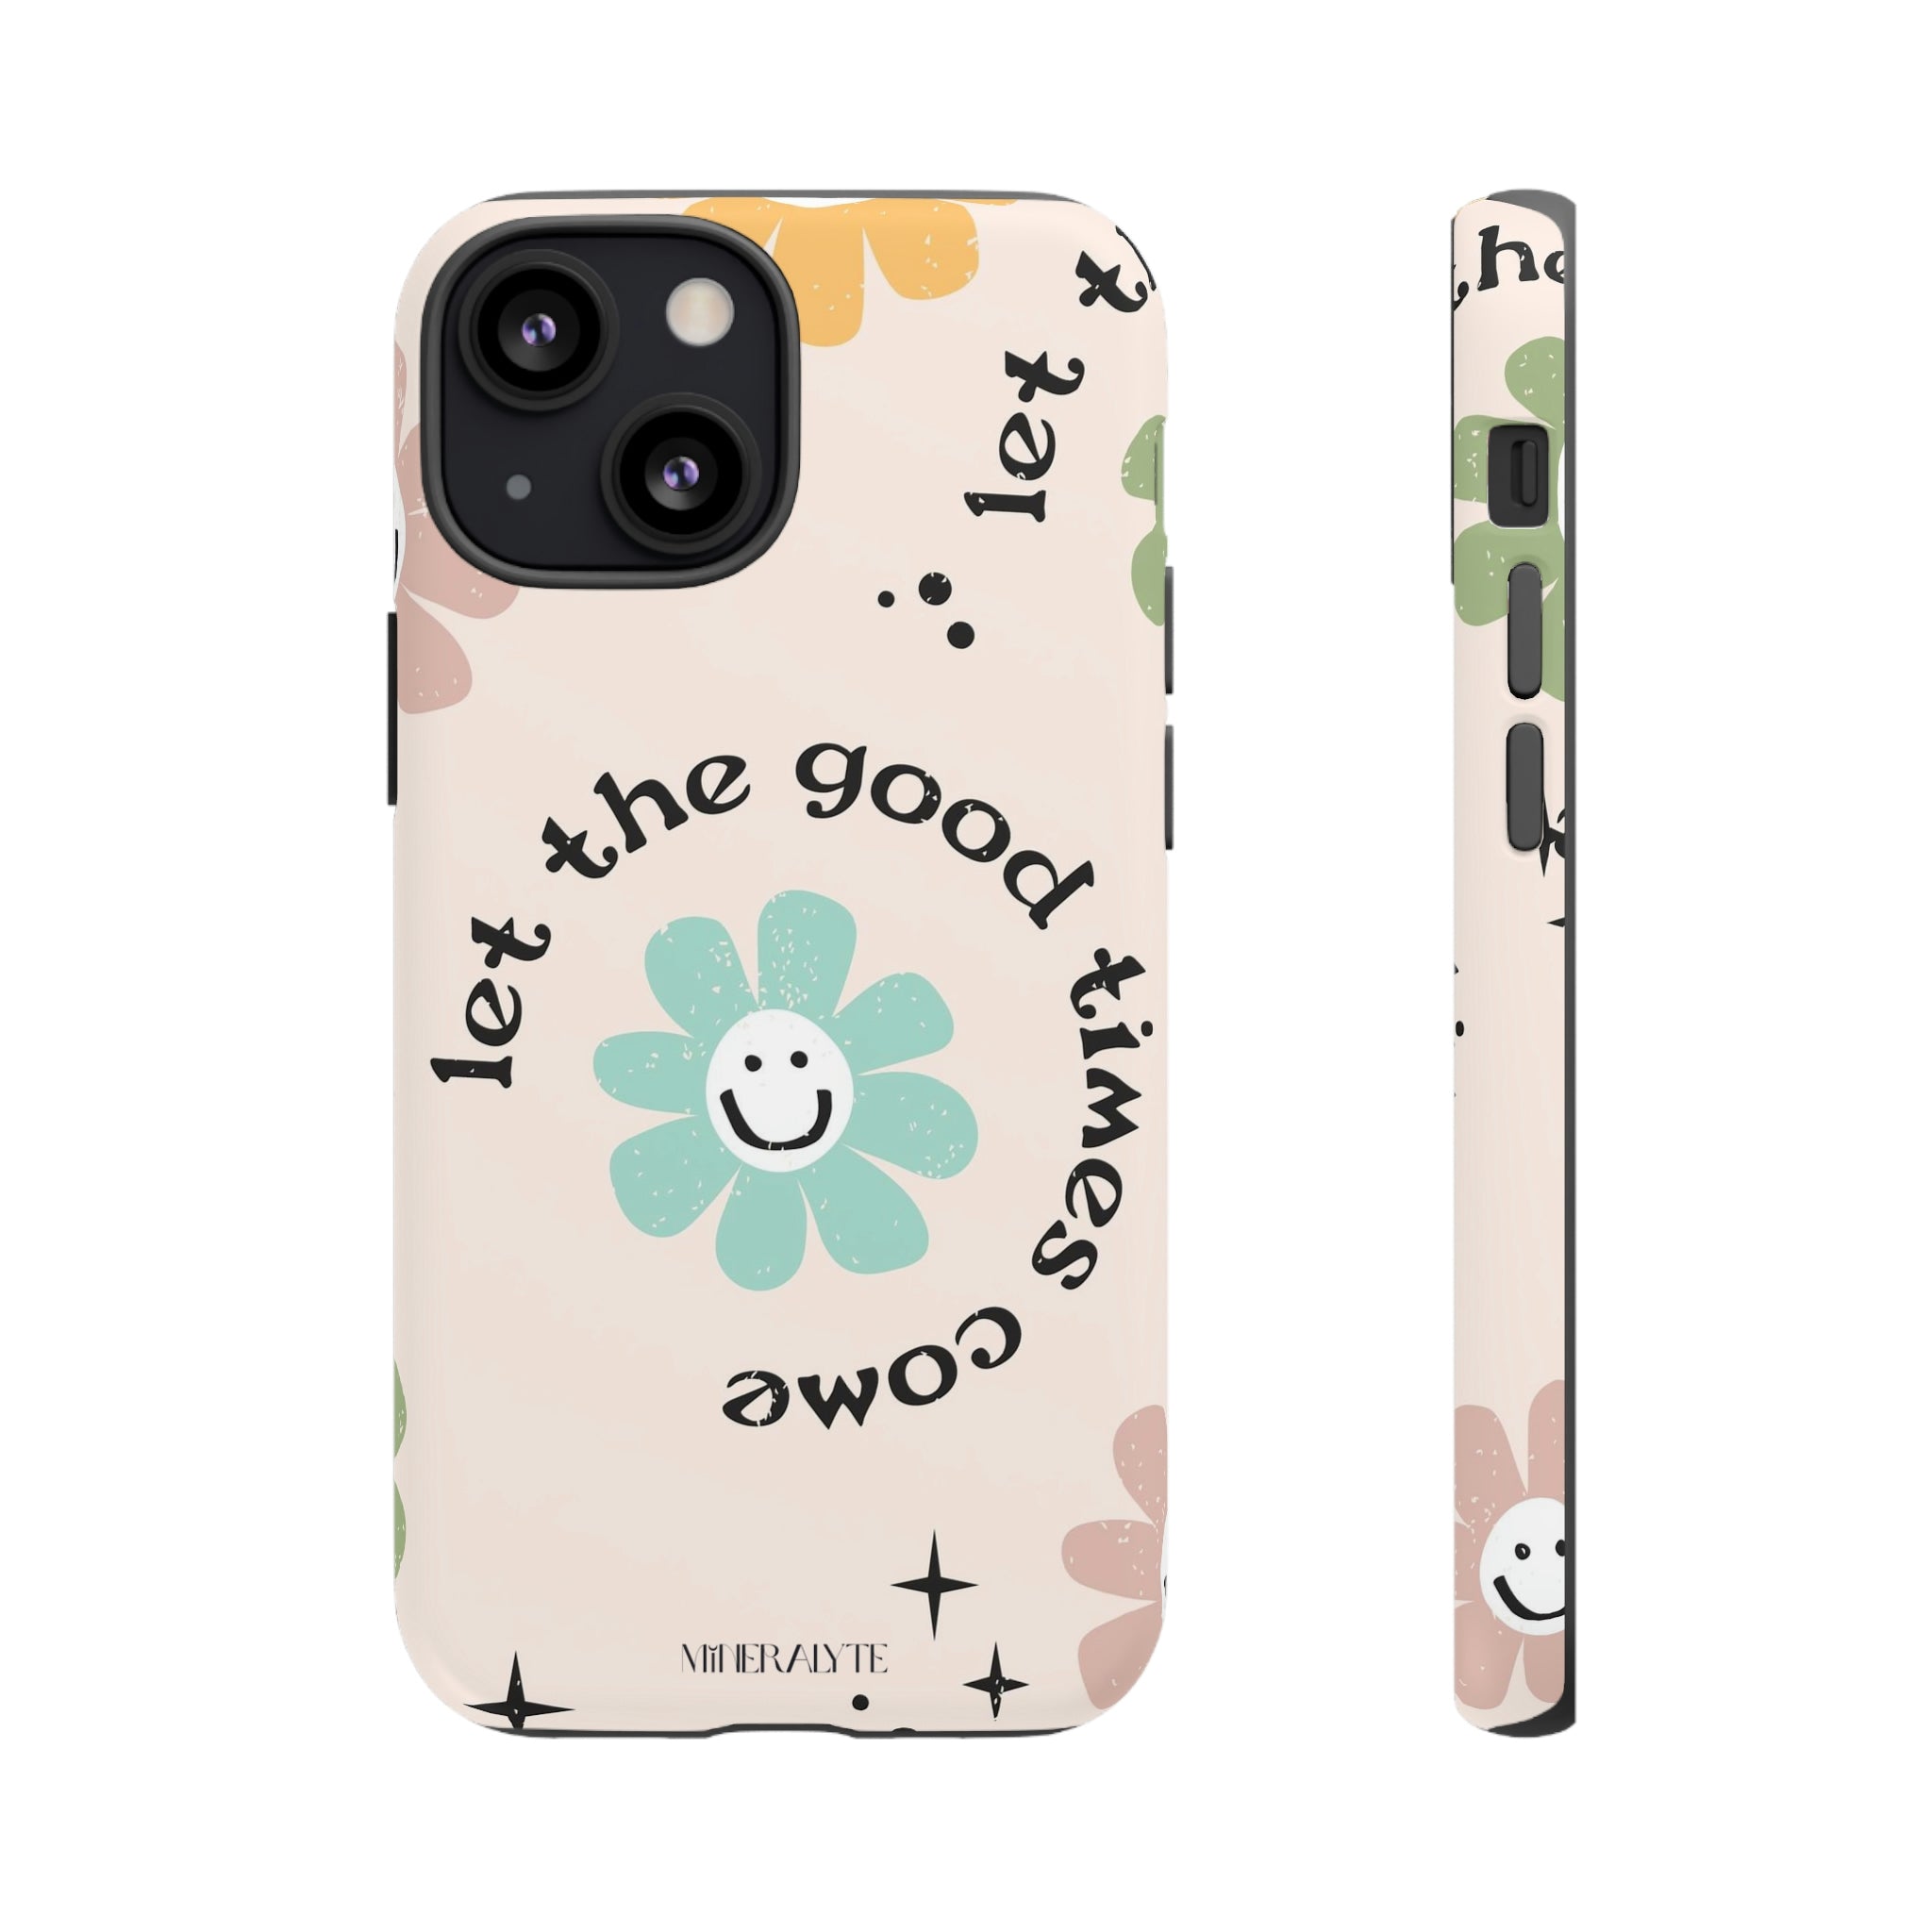 Let The Good Times Come Phone Case - Time's Reel